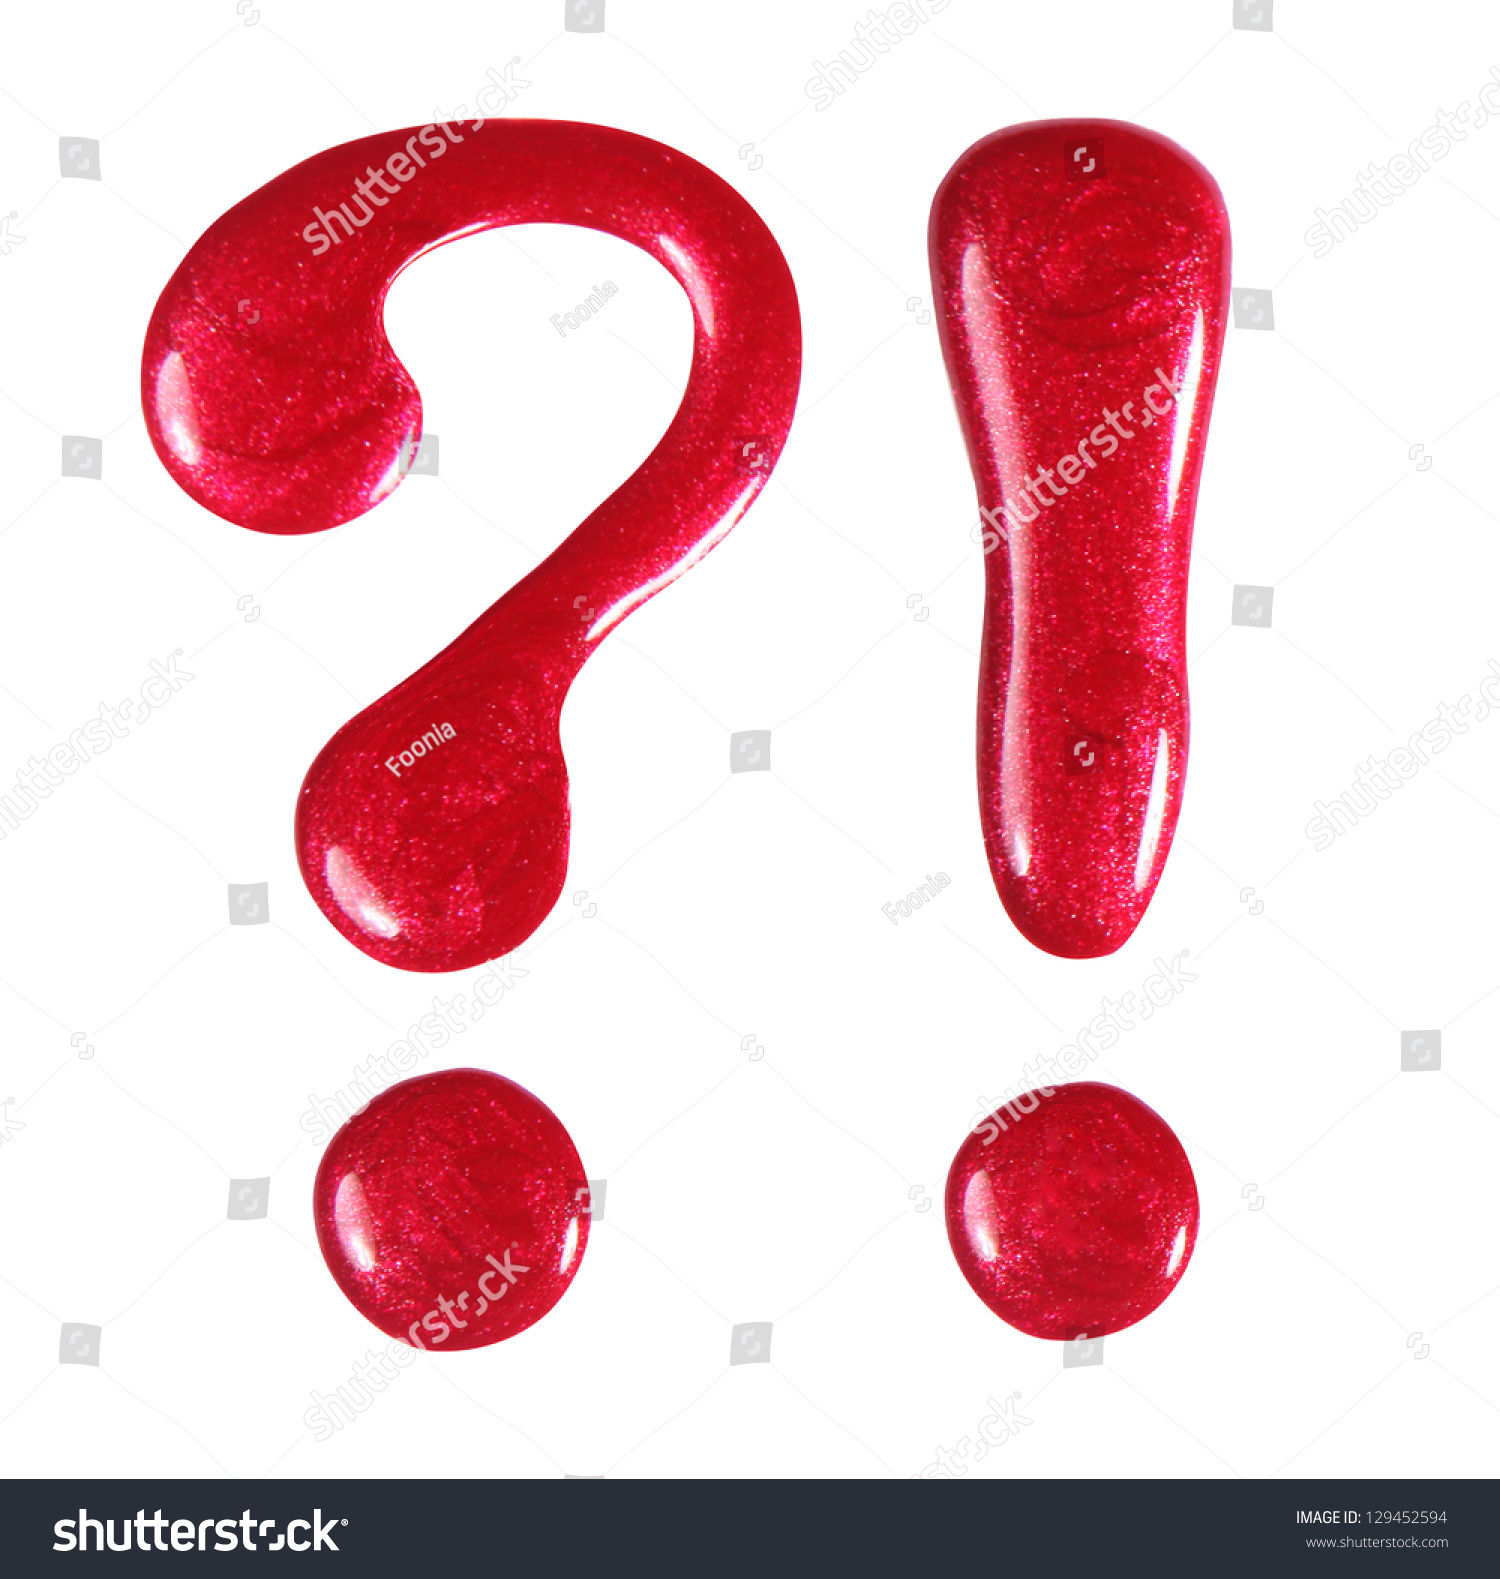 Wet Look Question And Exclamation Mark Isolated On White Stock Photo ...